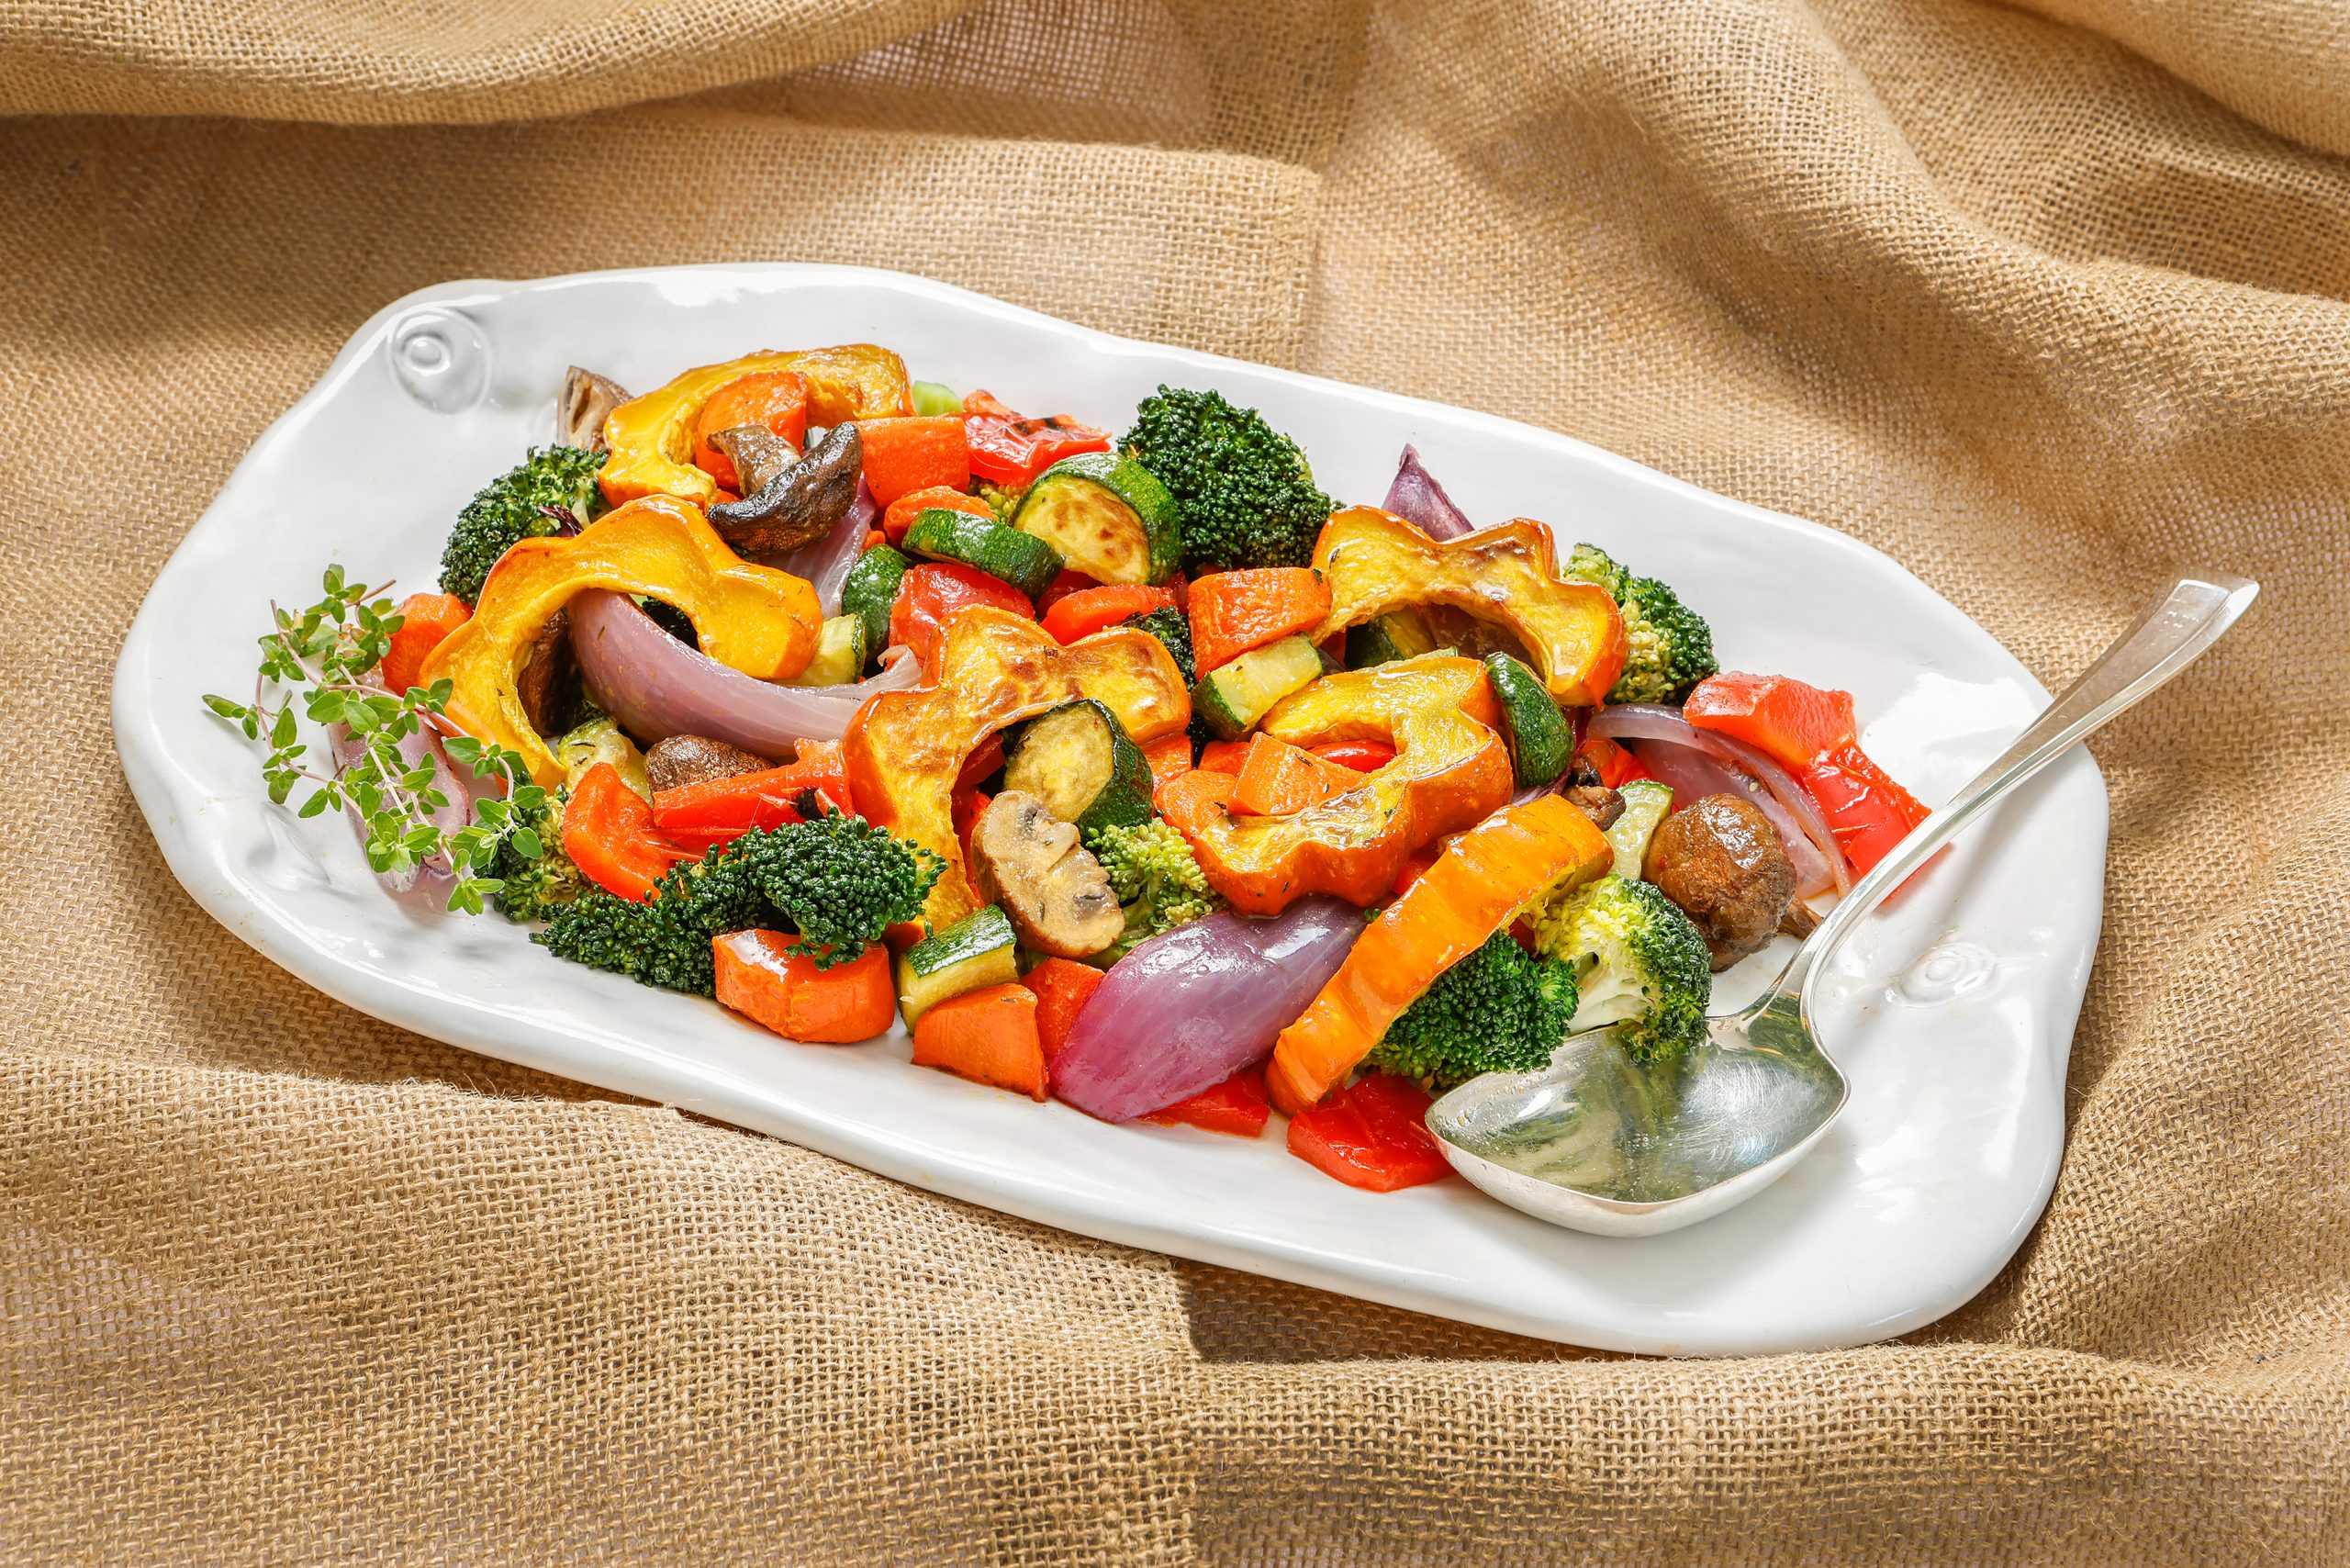 The caramelization that occurs during the roasting process in the Roasted Vegetables recipe intensifies the inherent sweetness of the vegetables and enhances the flavor. Montes Doggett large platter courtesy of Kudzu Bakery & Market.